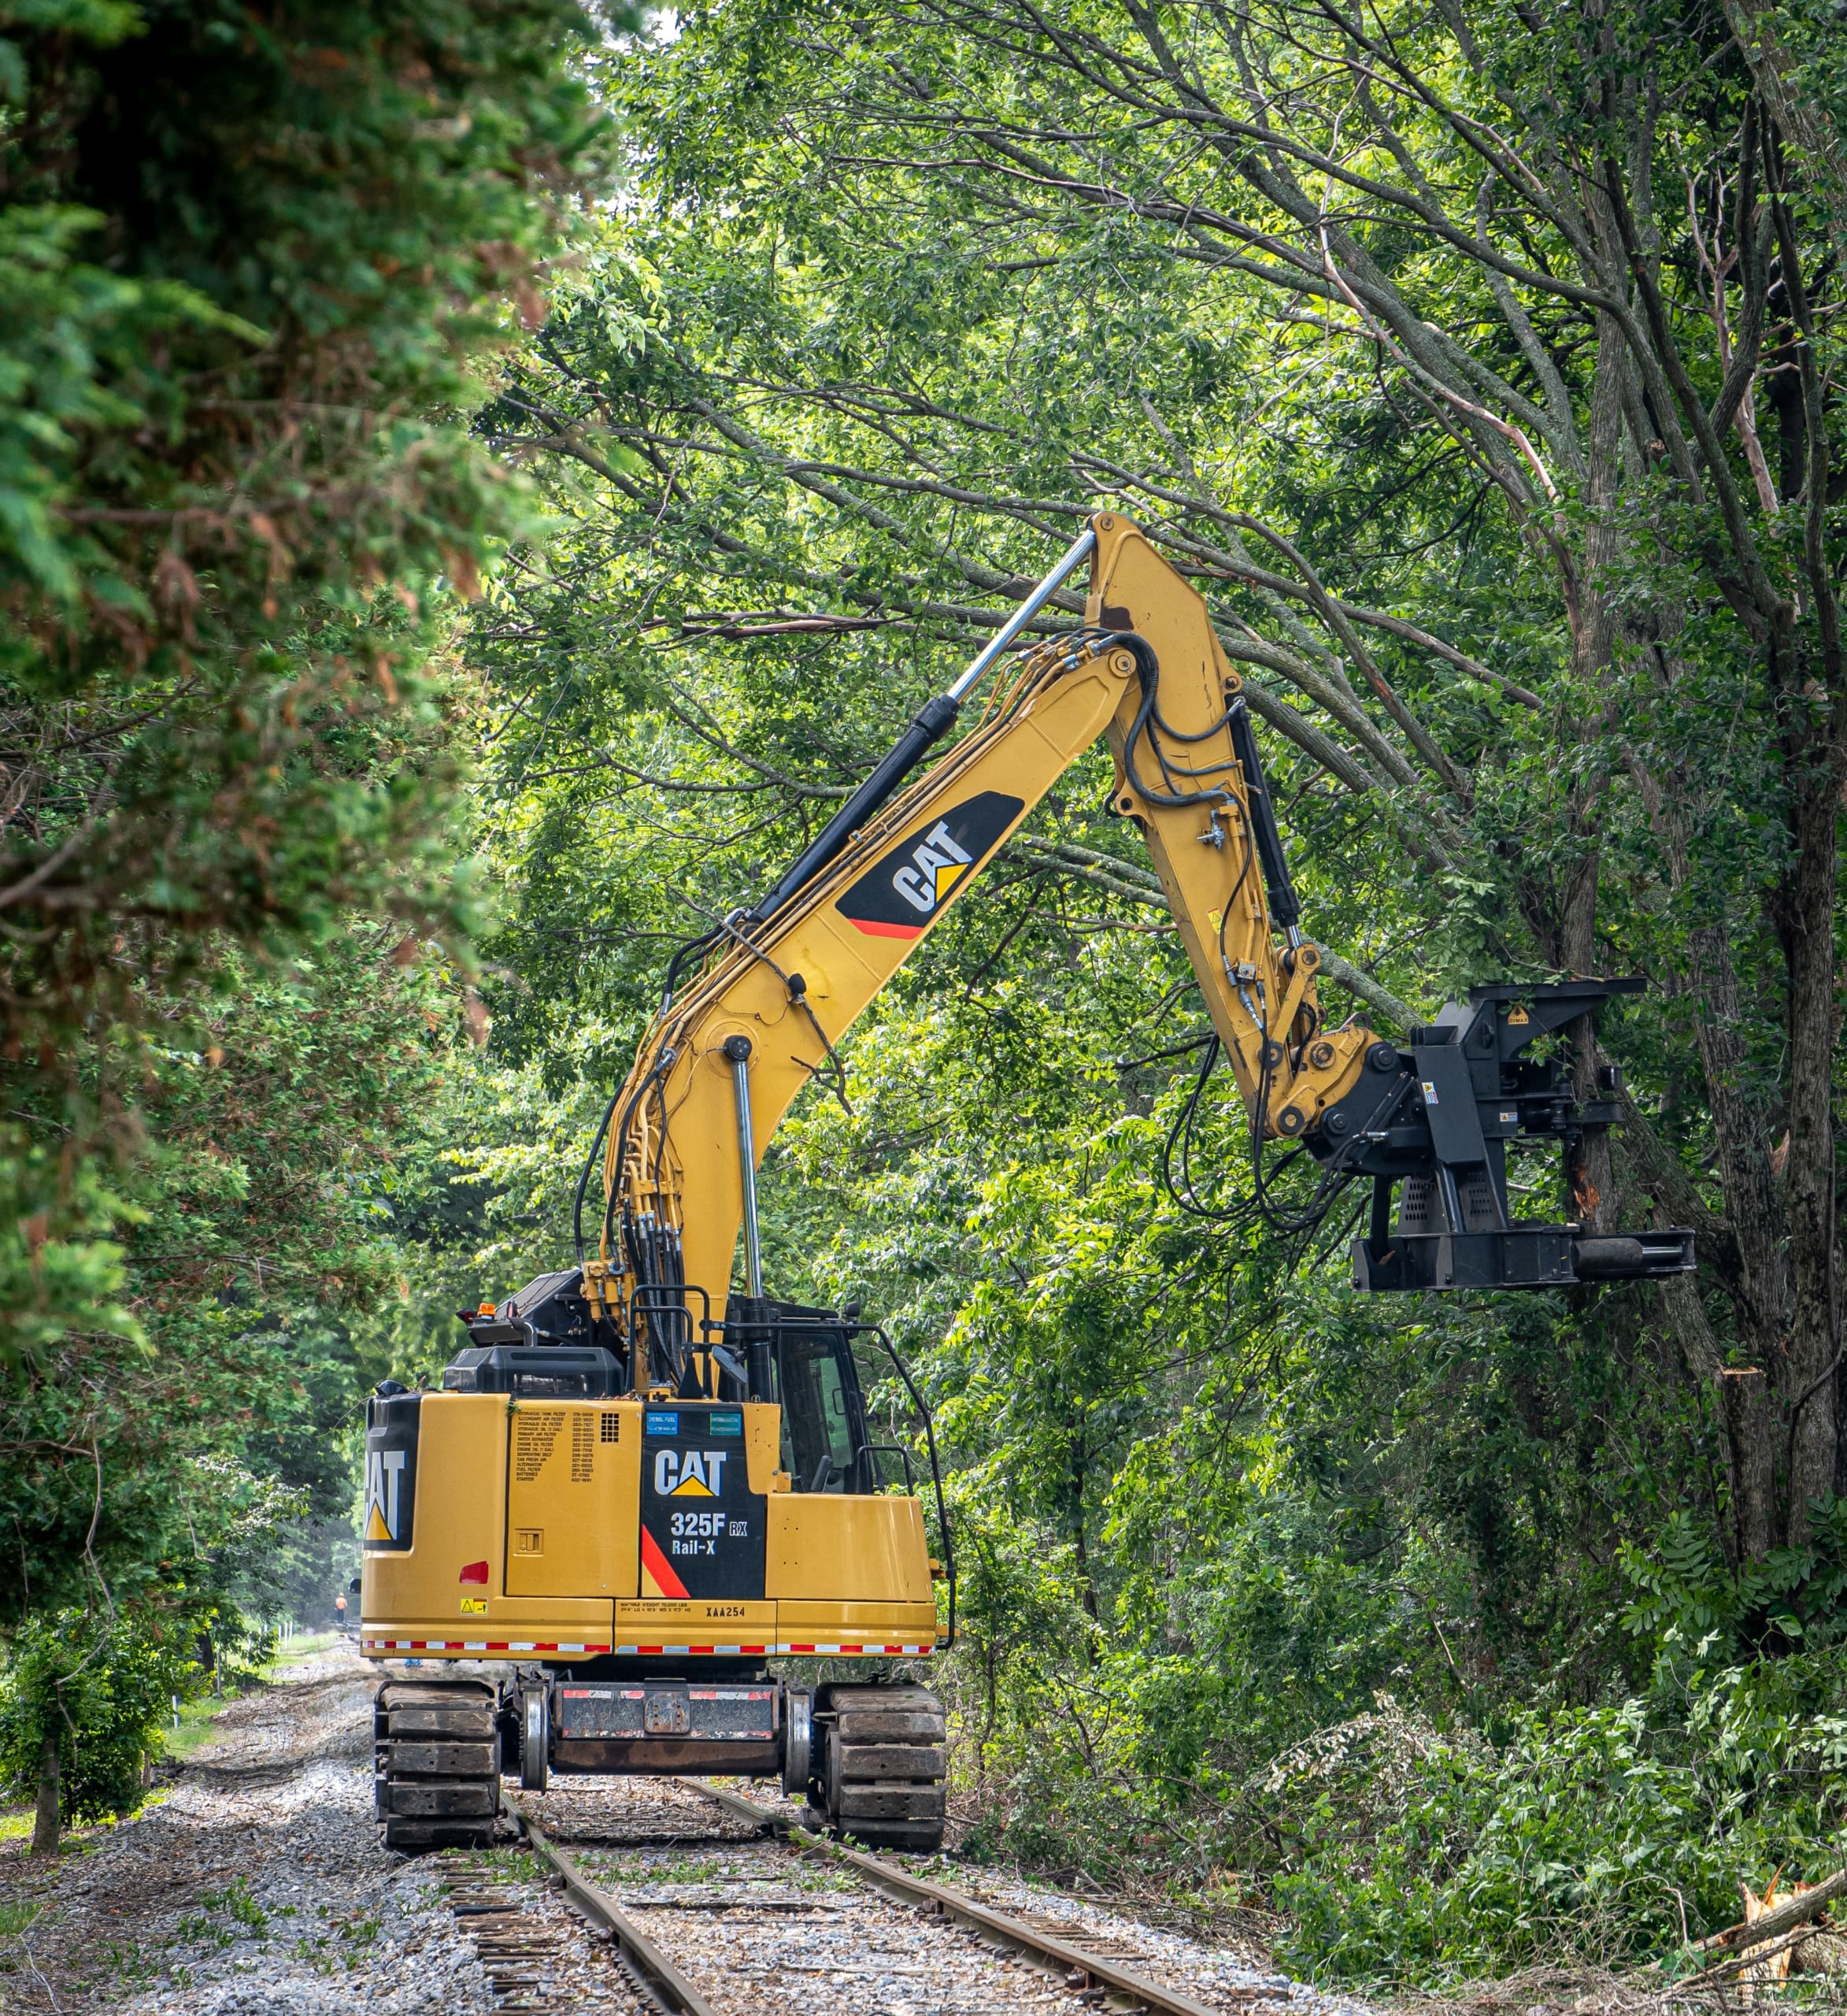 Cat excavator using Dymax 21" tree shear to trim branches overhanging railroad